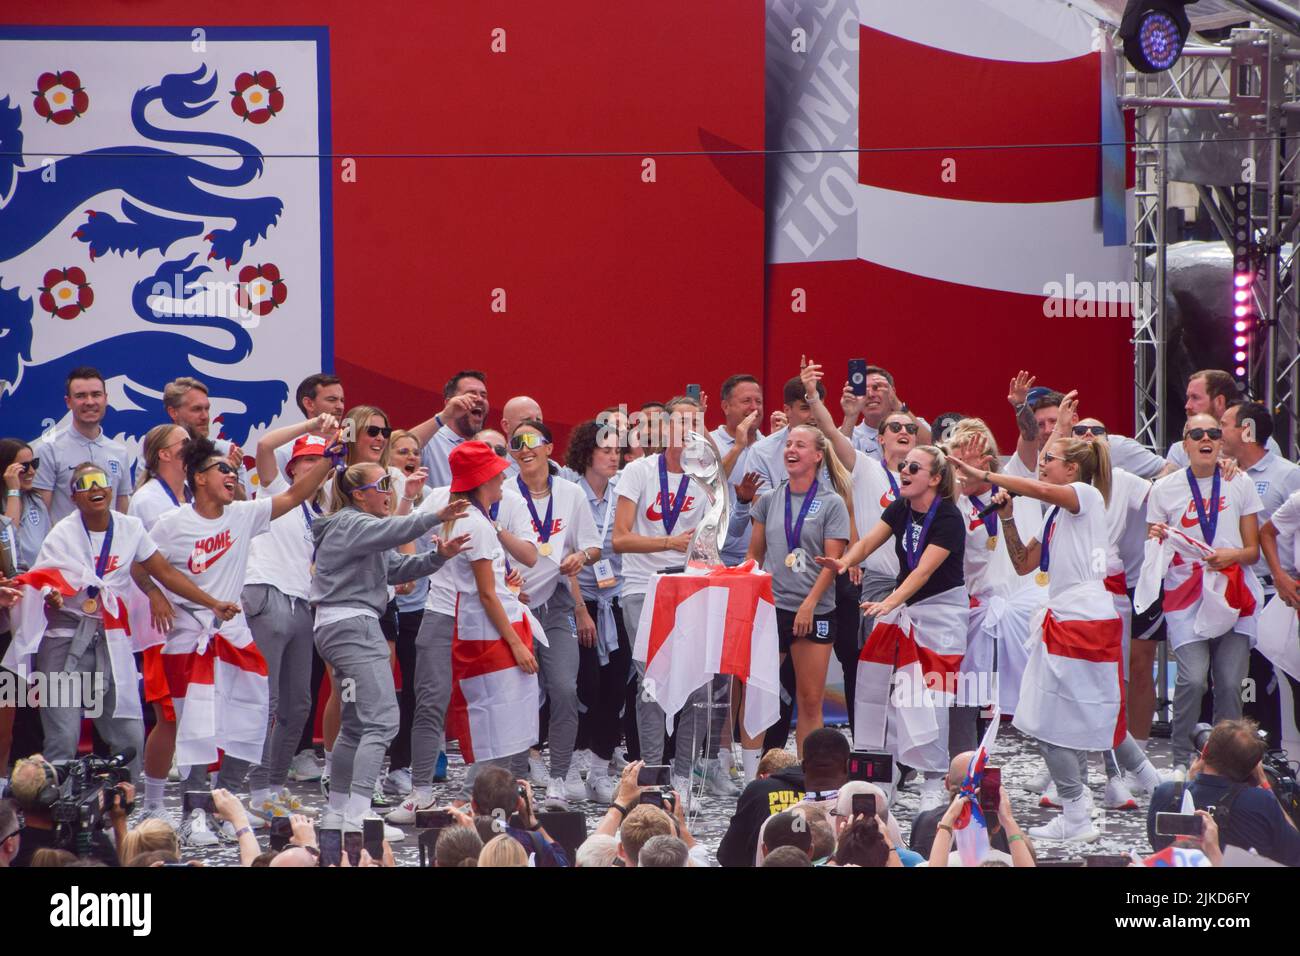 London, UK. 01st Aug, 2022. The England team celebrates on the stage during the Women's Euro 2022 special event in Trafalgar Square. Thousands of people gathered to celebrate the England team, known as the Lionesses, winning Women's Euro 2022 soccer tournament. England beat Germany 2-1. (Photo by Vuk Valcic/SOPA Images/Sipa USA) Credit: Sipa USA/Alamy Live News Stock Photo